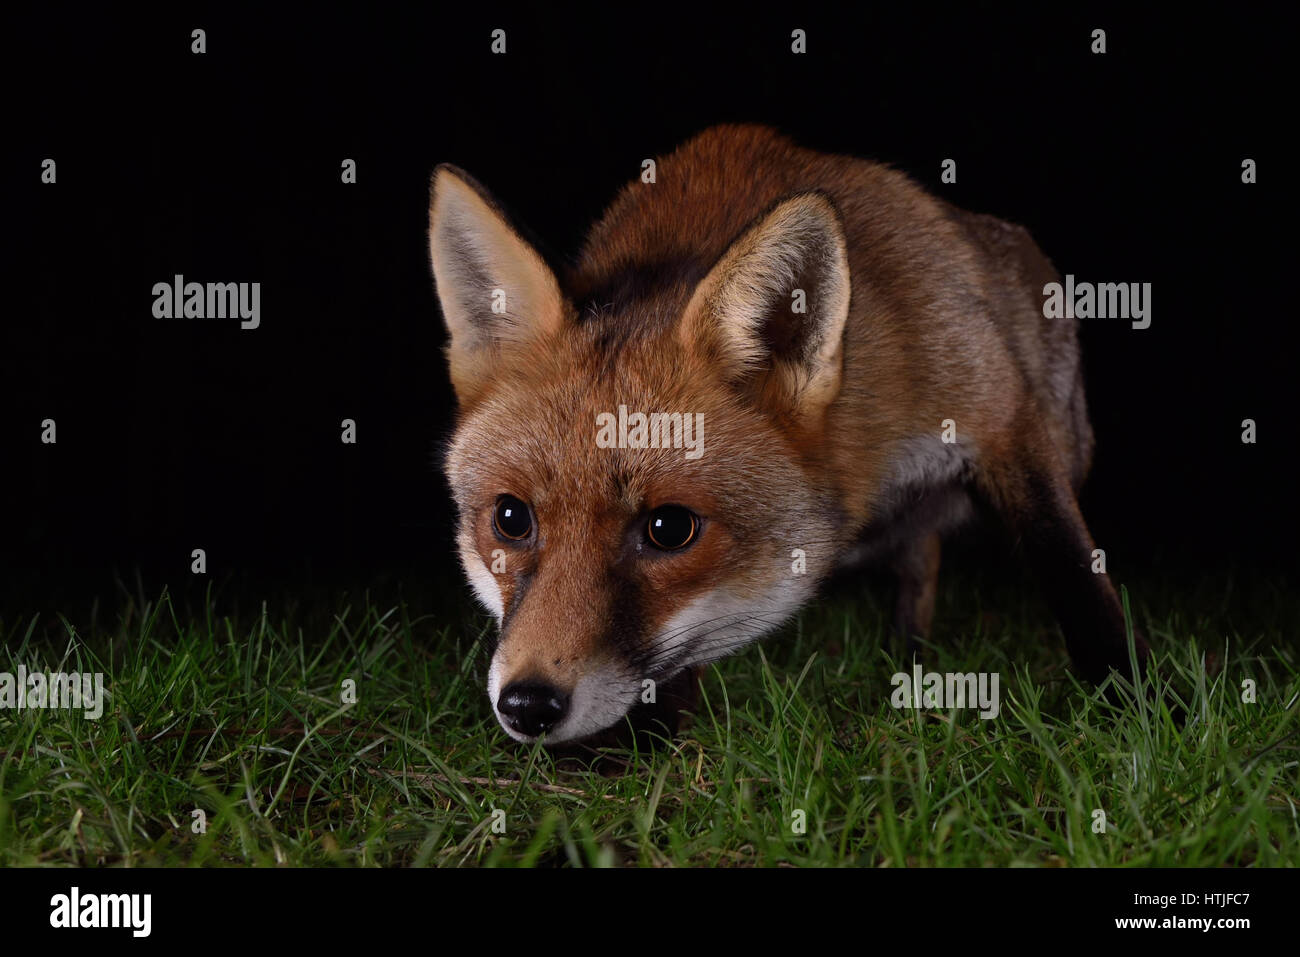 Fox prowling for food in a London garden at night Stock Photo